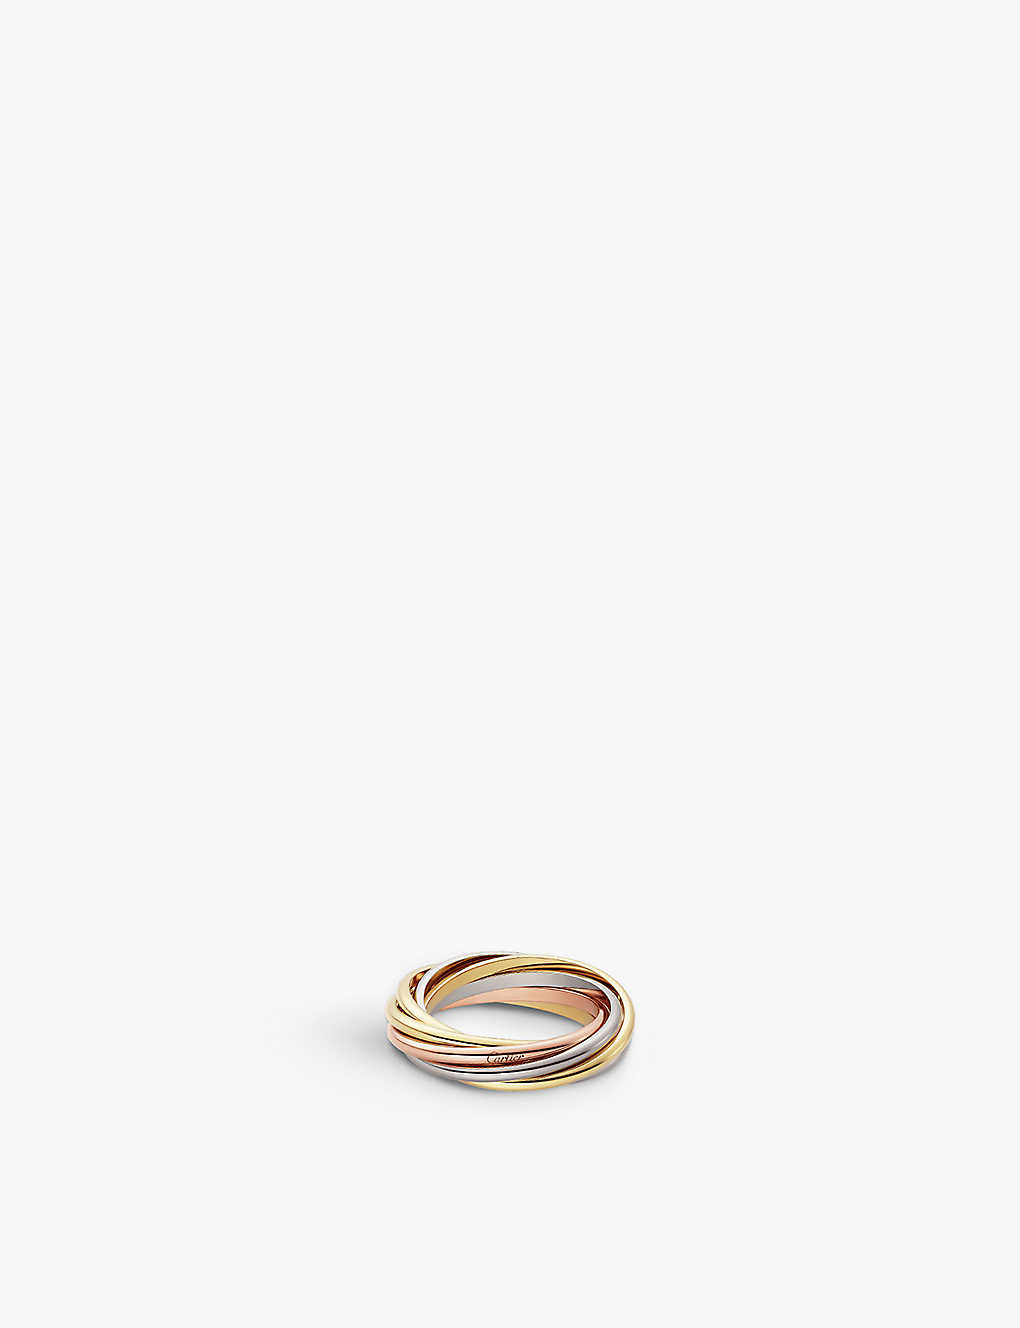 Cartier Womens Tri-gold Trinity 18ct White-gold, Rose-gold And Yellow-gold Ring